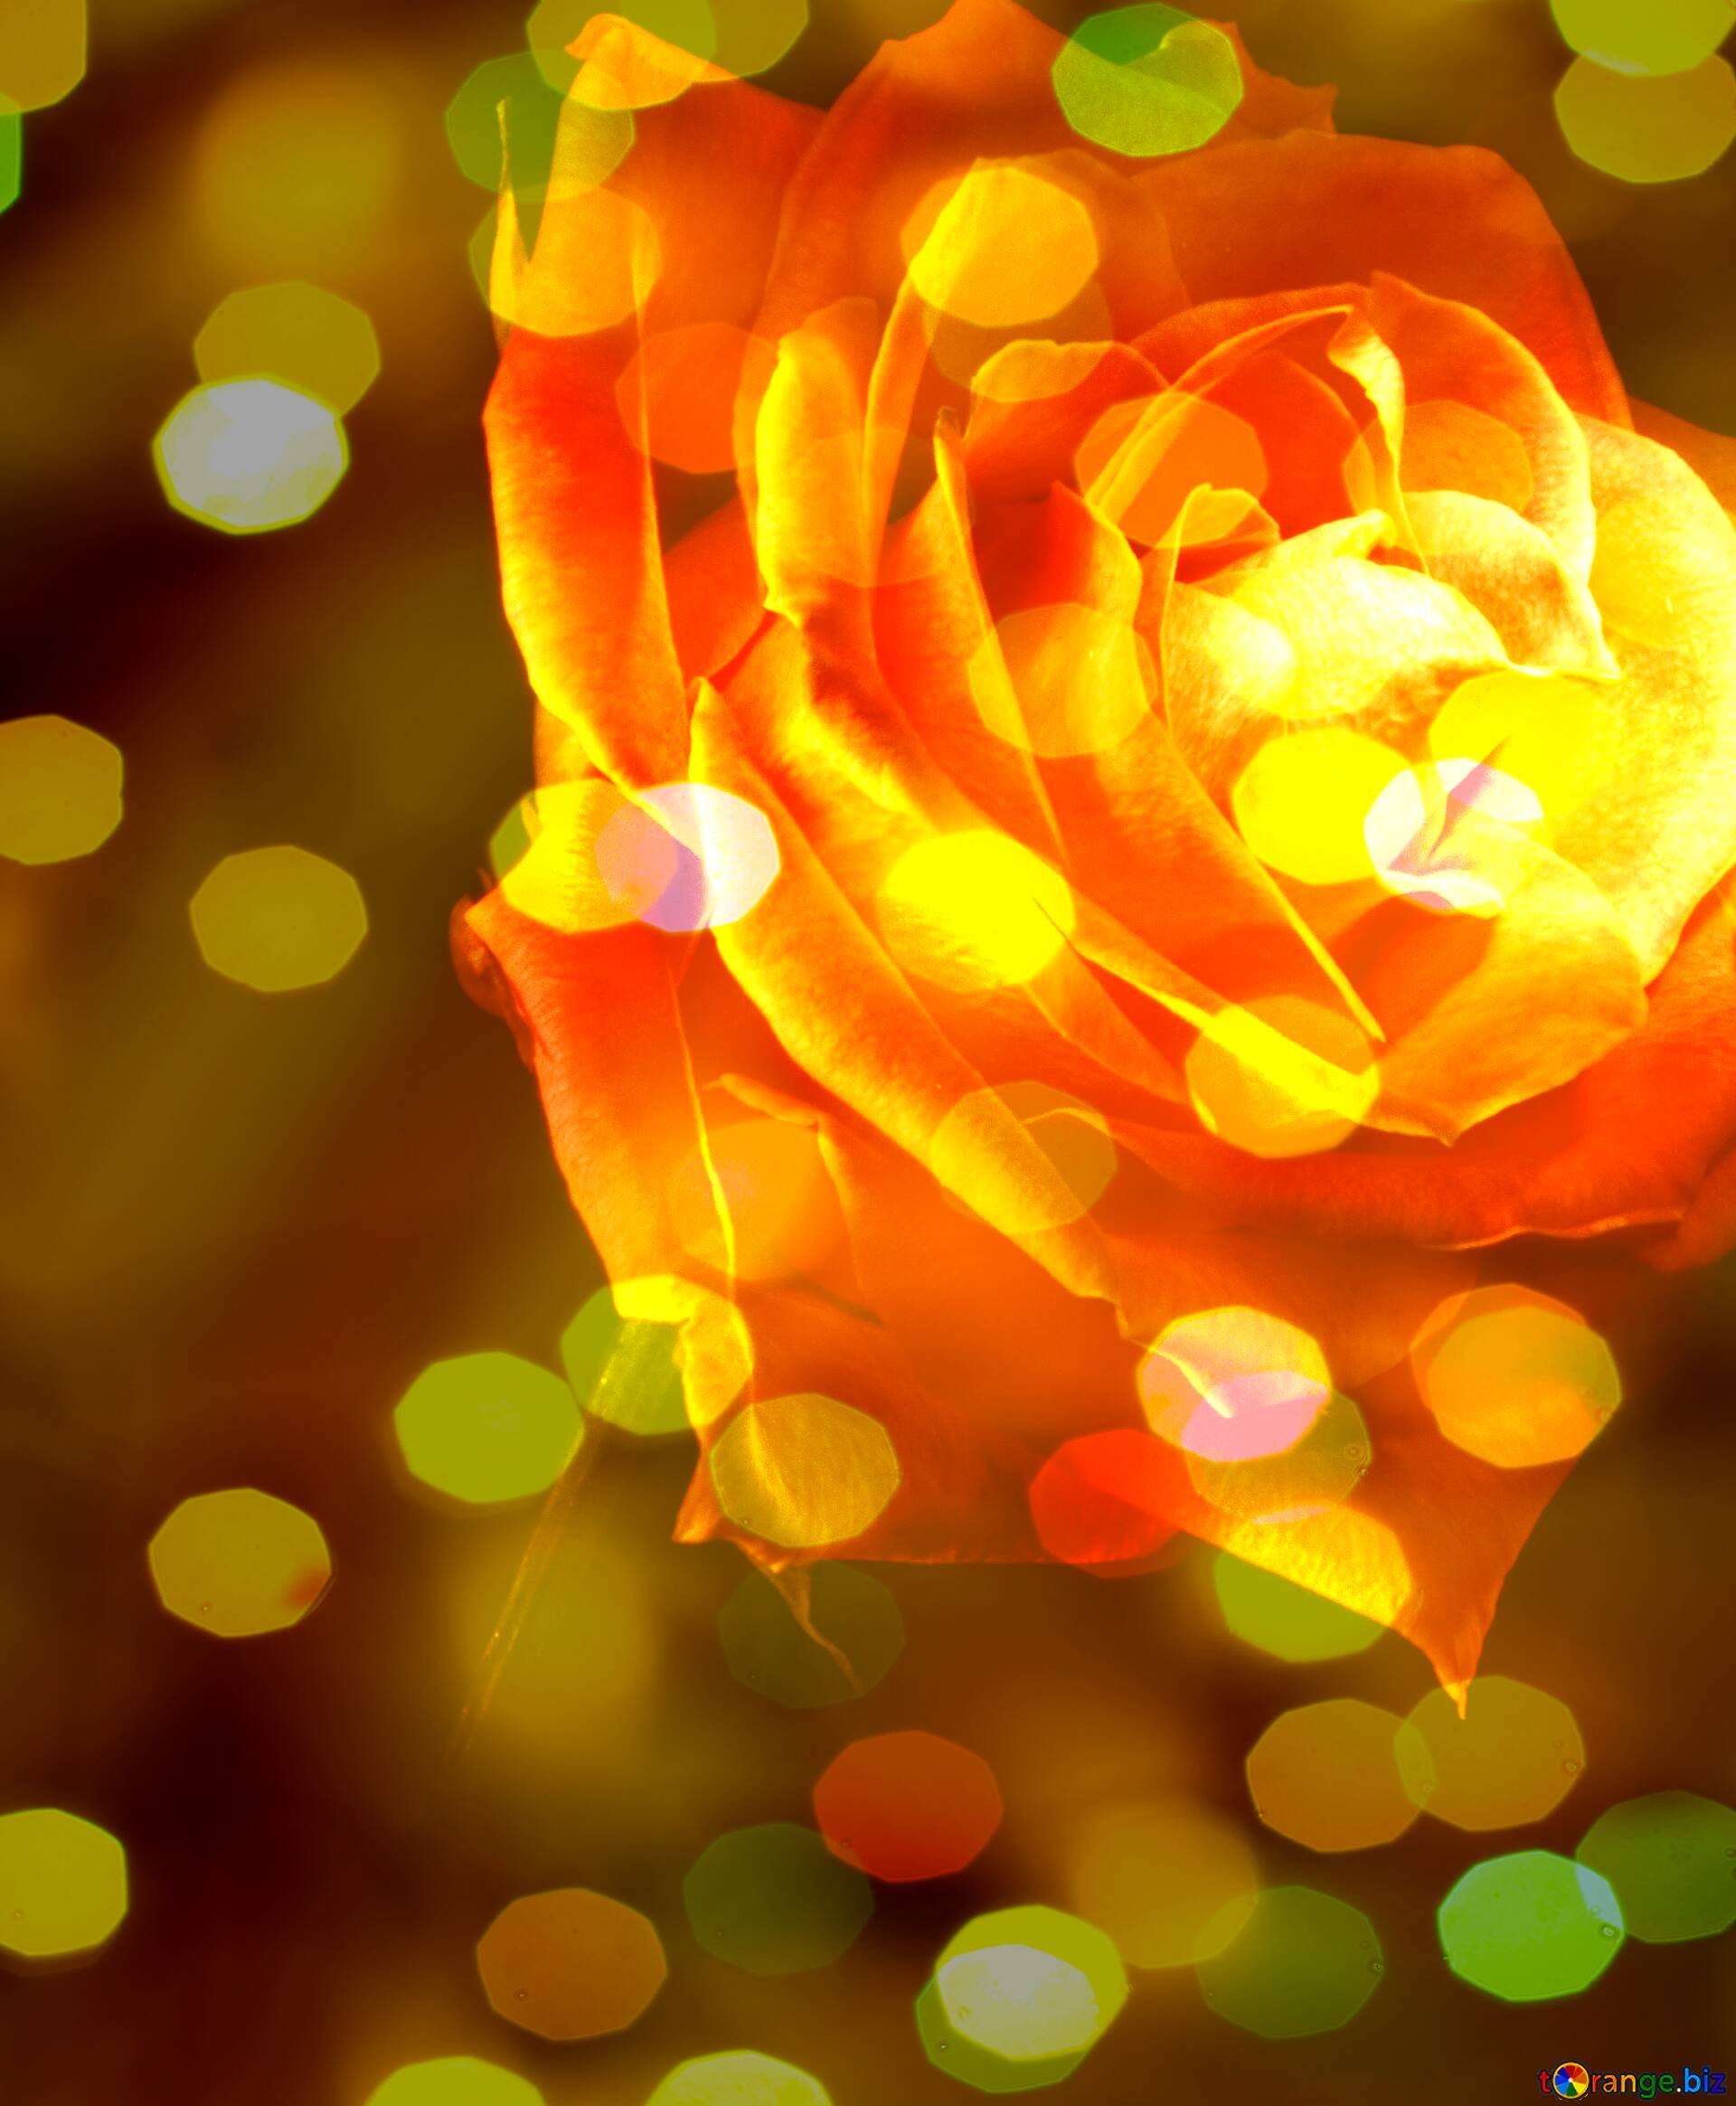 Download wallpaper 1350x2400 rose flower flame fire iphone 876s6  for parallax hd background